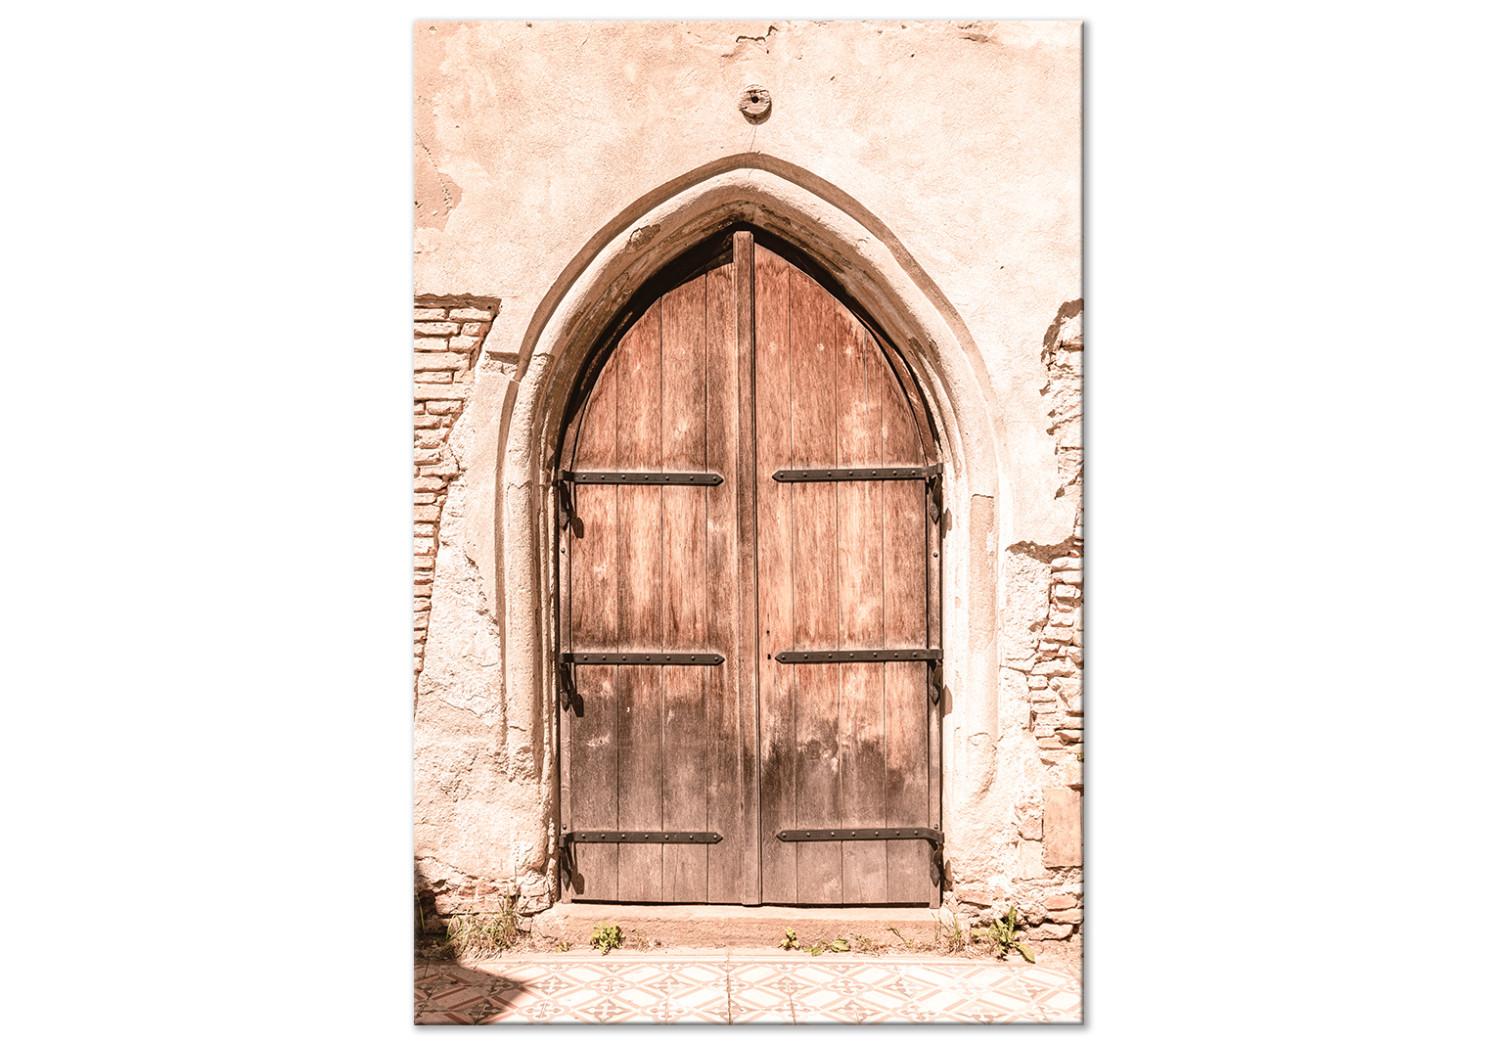 Canvas Mysterious Gates (1-piece) - urban landscape with a wooden gate